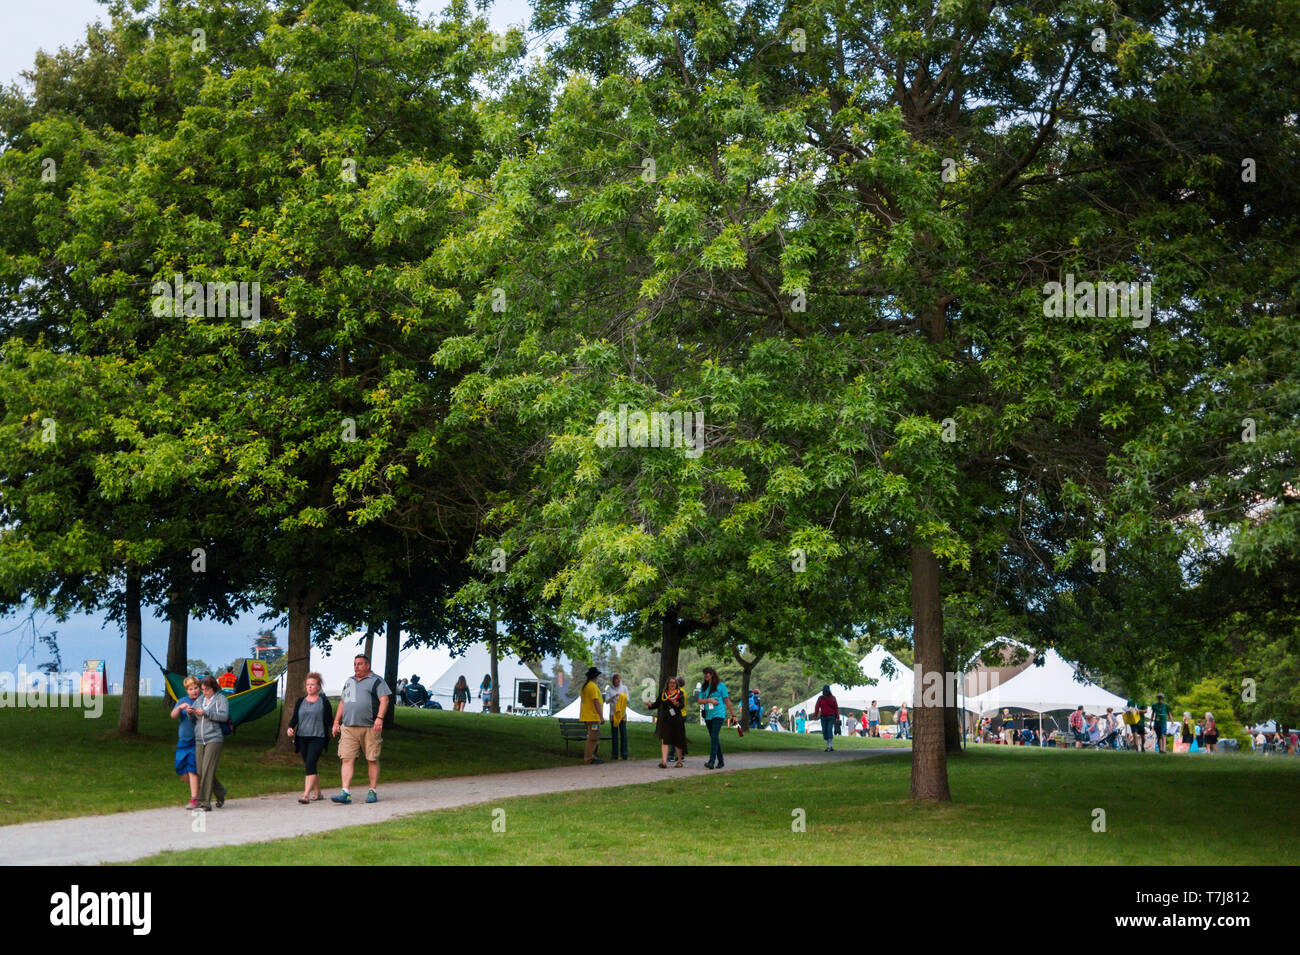 Attendees walk through Jericho Beach Park during the Vancouver Folk Festival in British Columbia, Canada Stock Photo